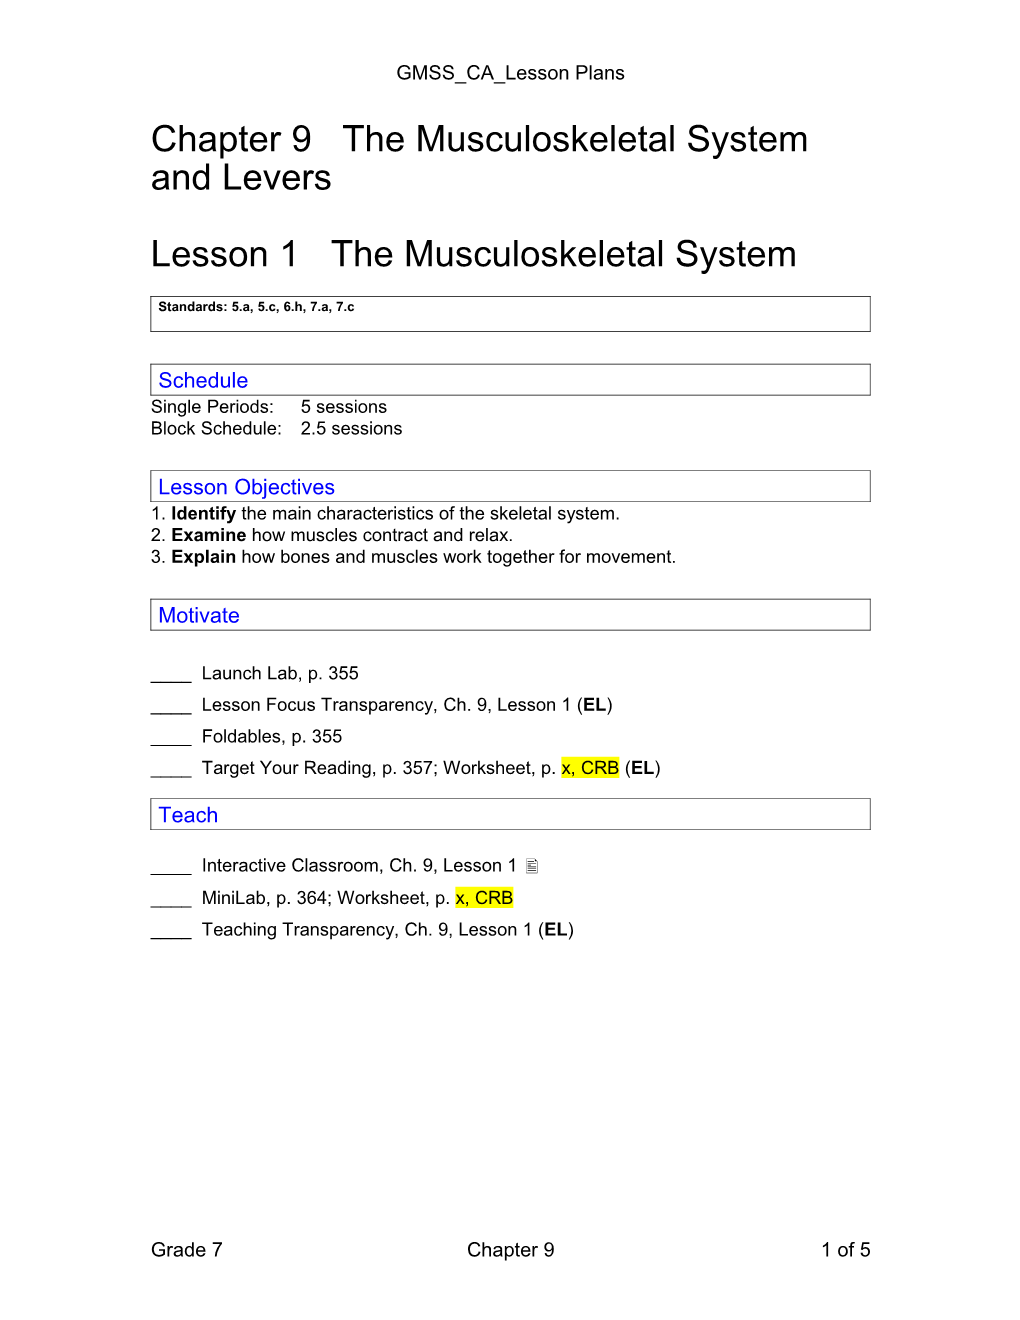 Chapter 9 the Musculoskeletal System and Levers